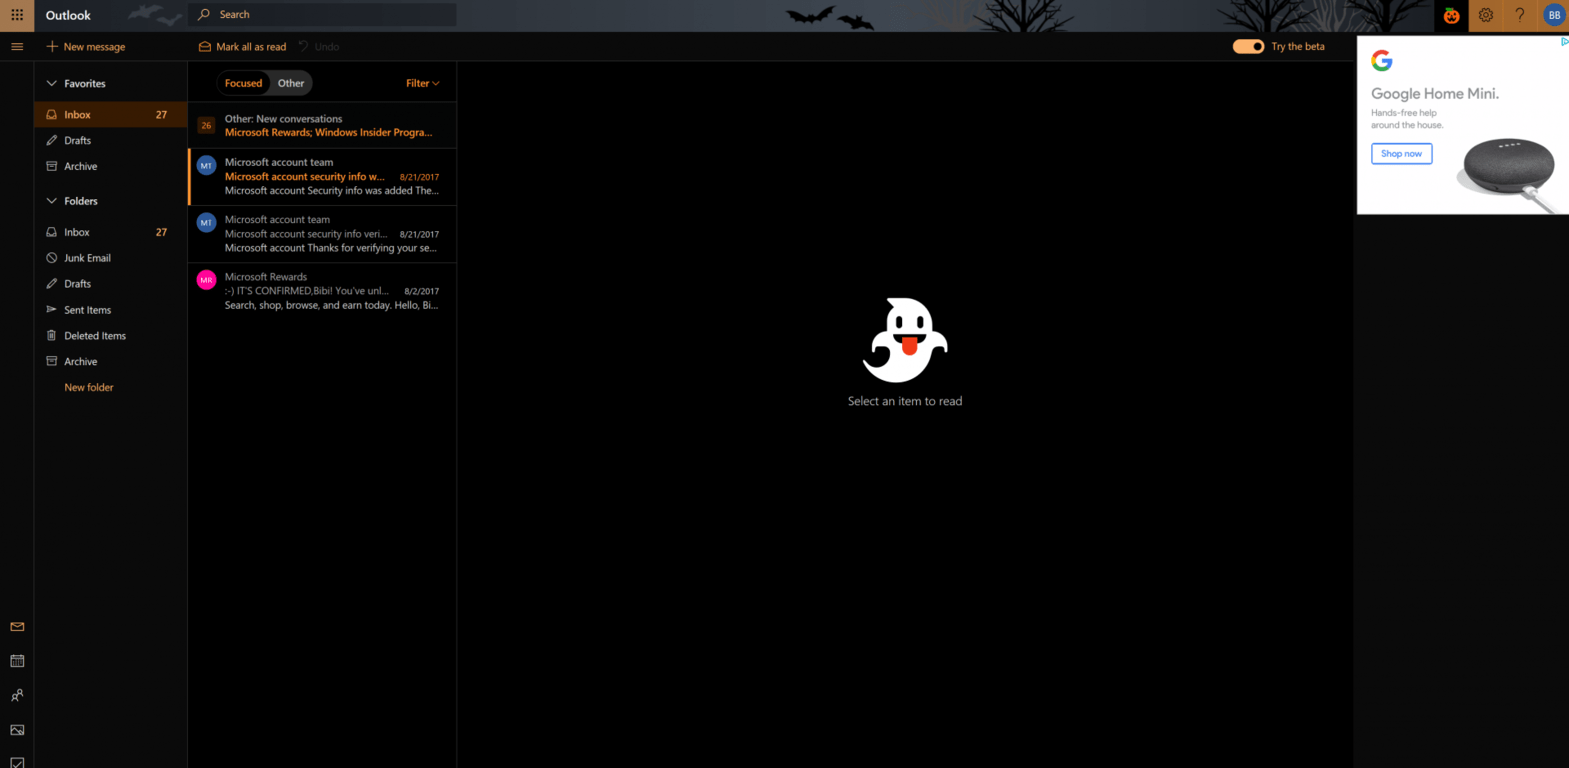 Microsoft makes Outlook.com spooky for Halloween - OnMSFT.com - October 30, 2017